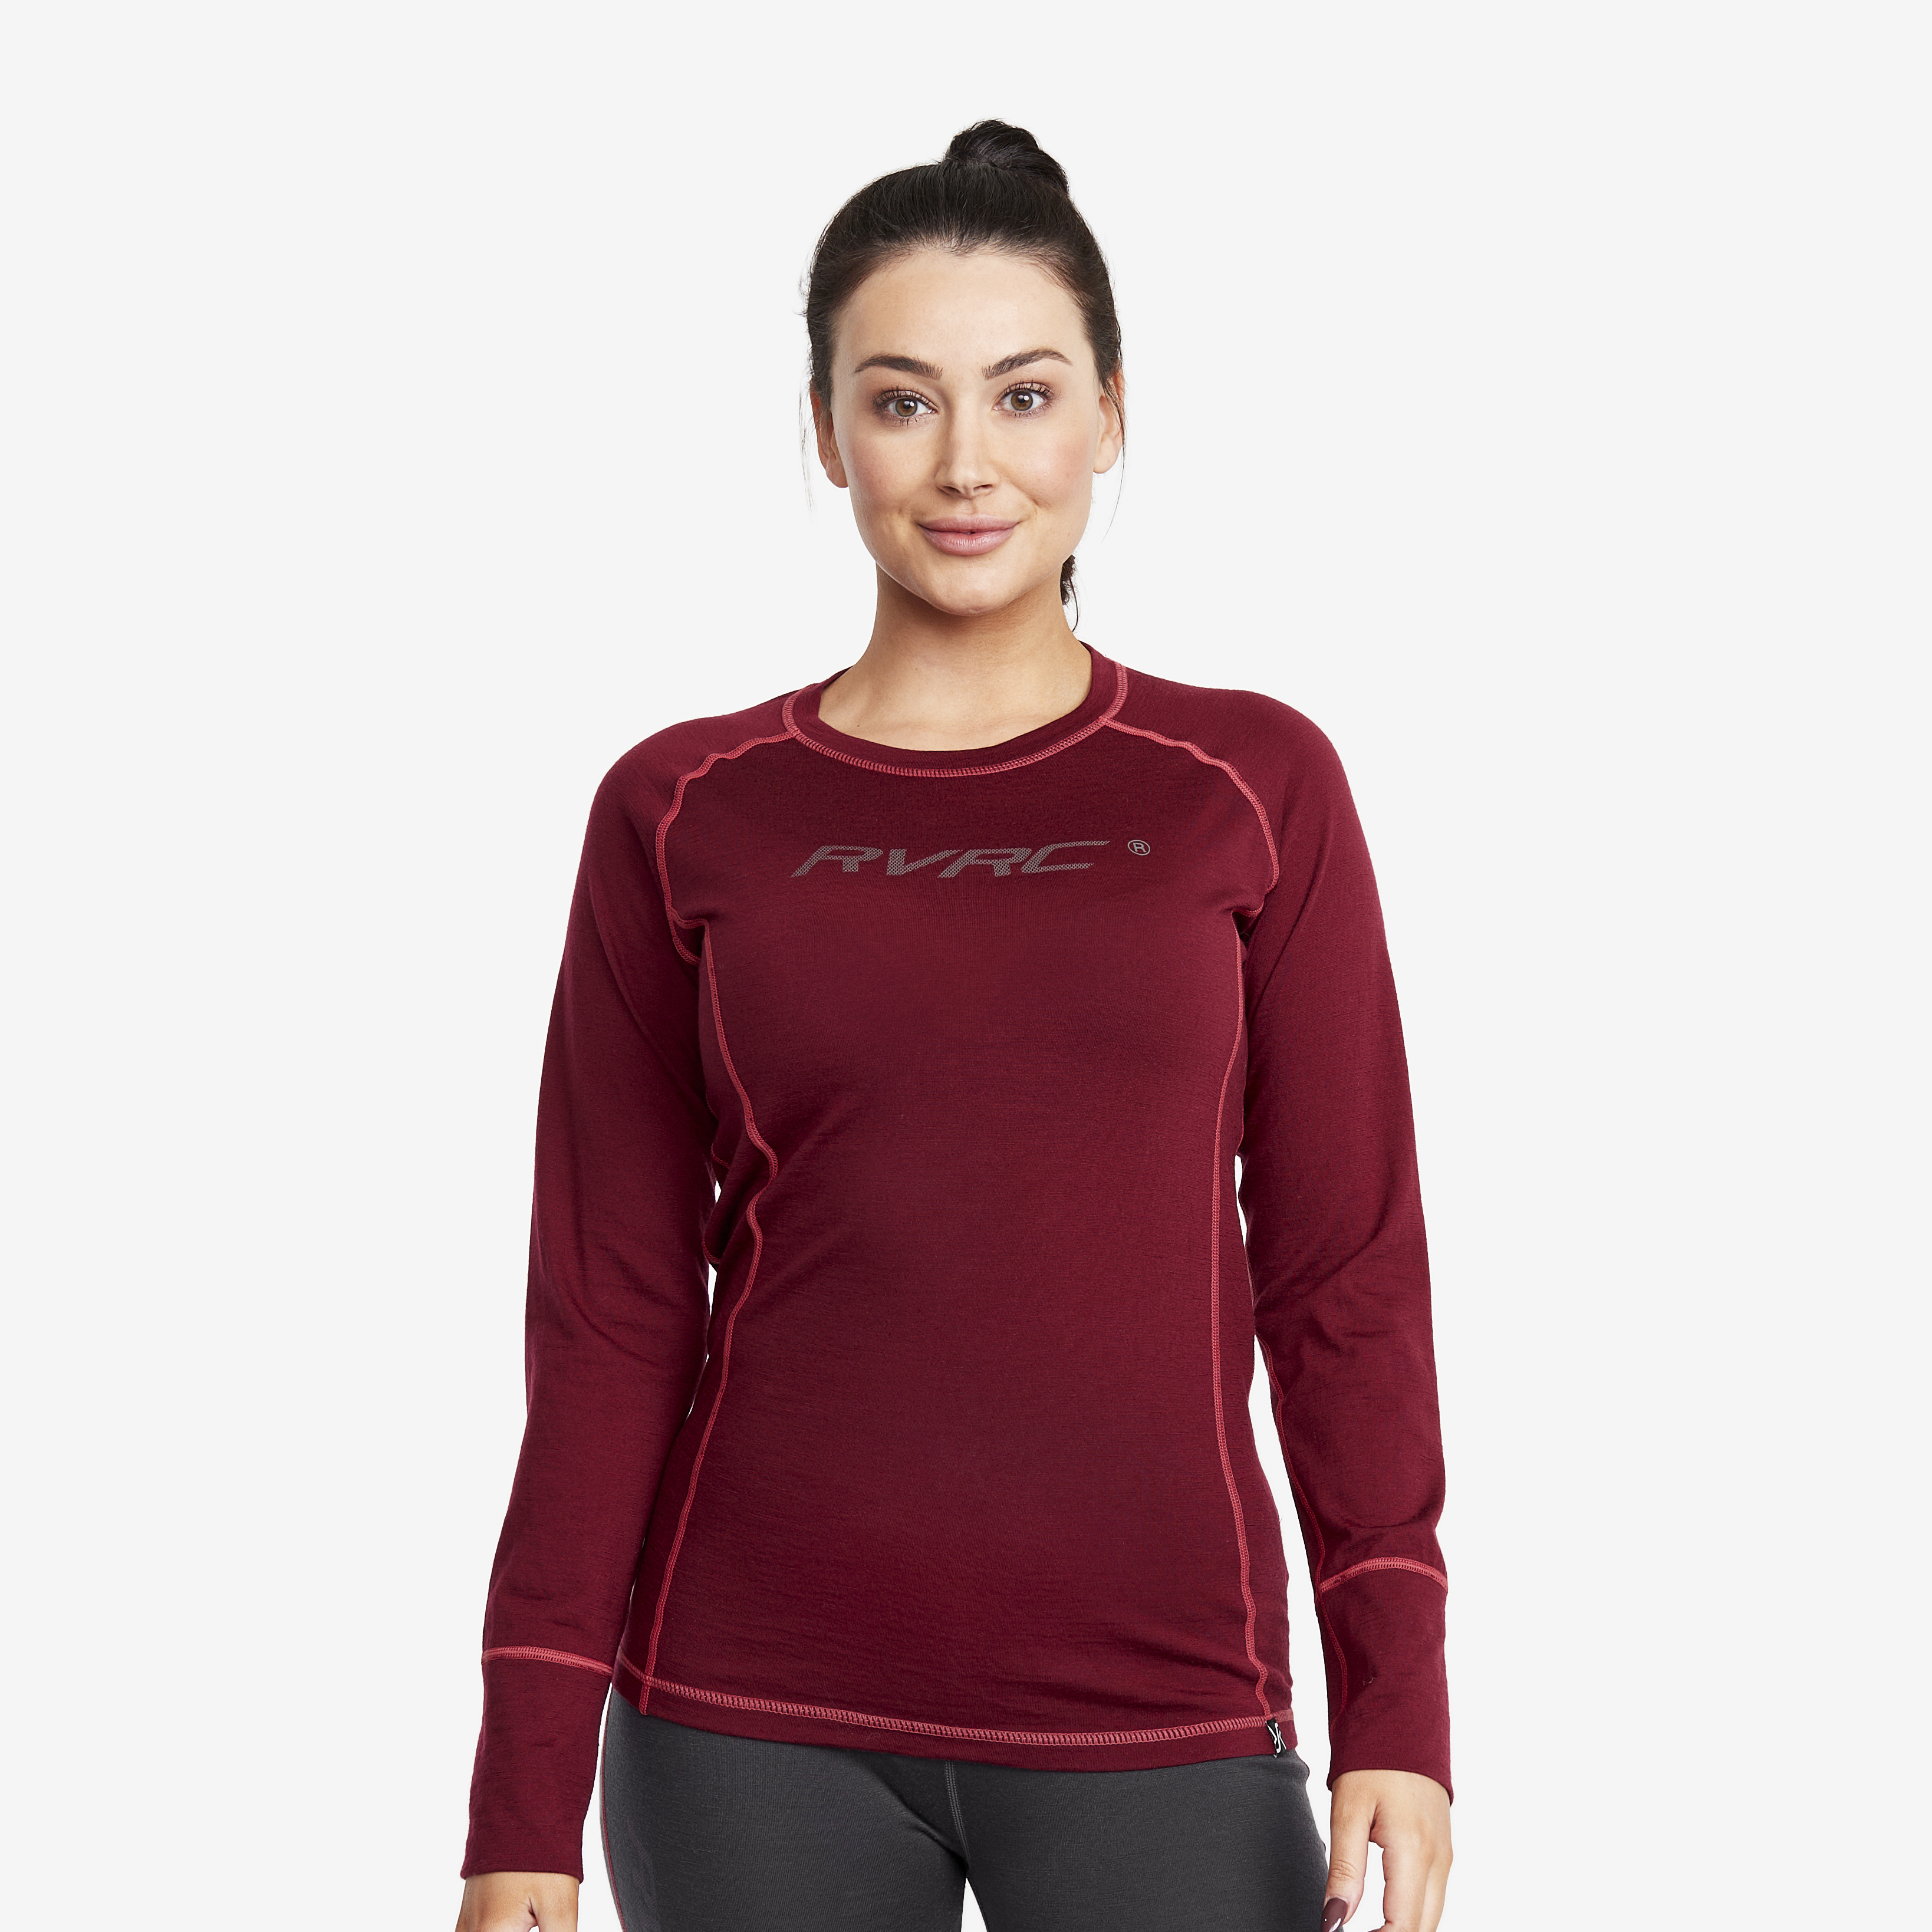 Outright Merino Top Bison Red/ Anthracite Dames